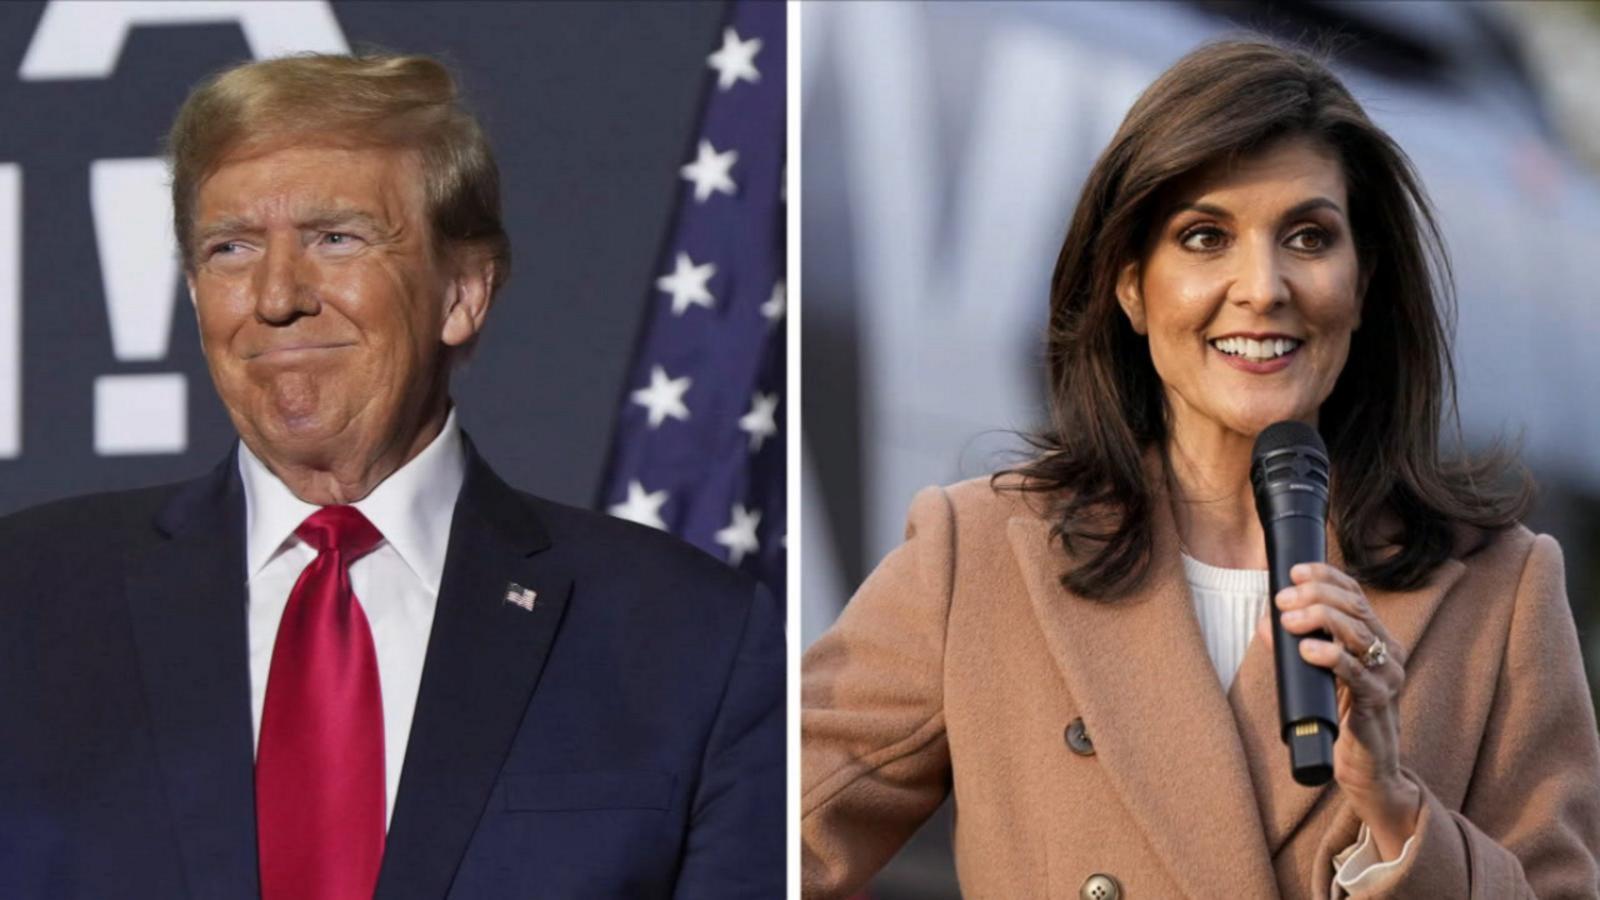 VIDEO: Trump, Haley hit the South before Super Tuesday